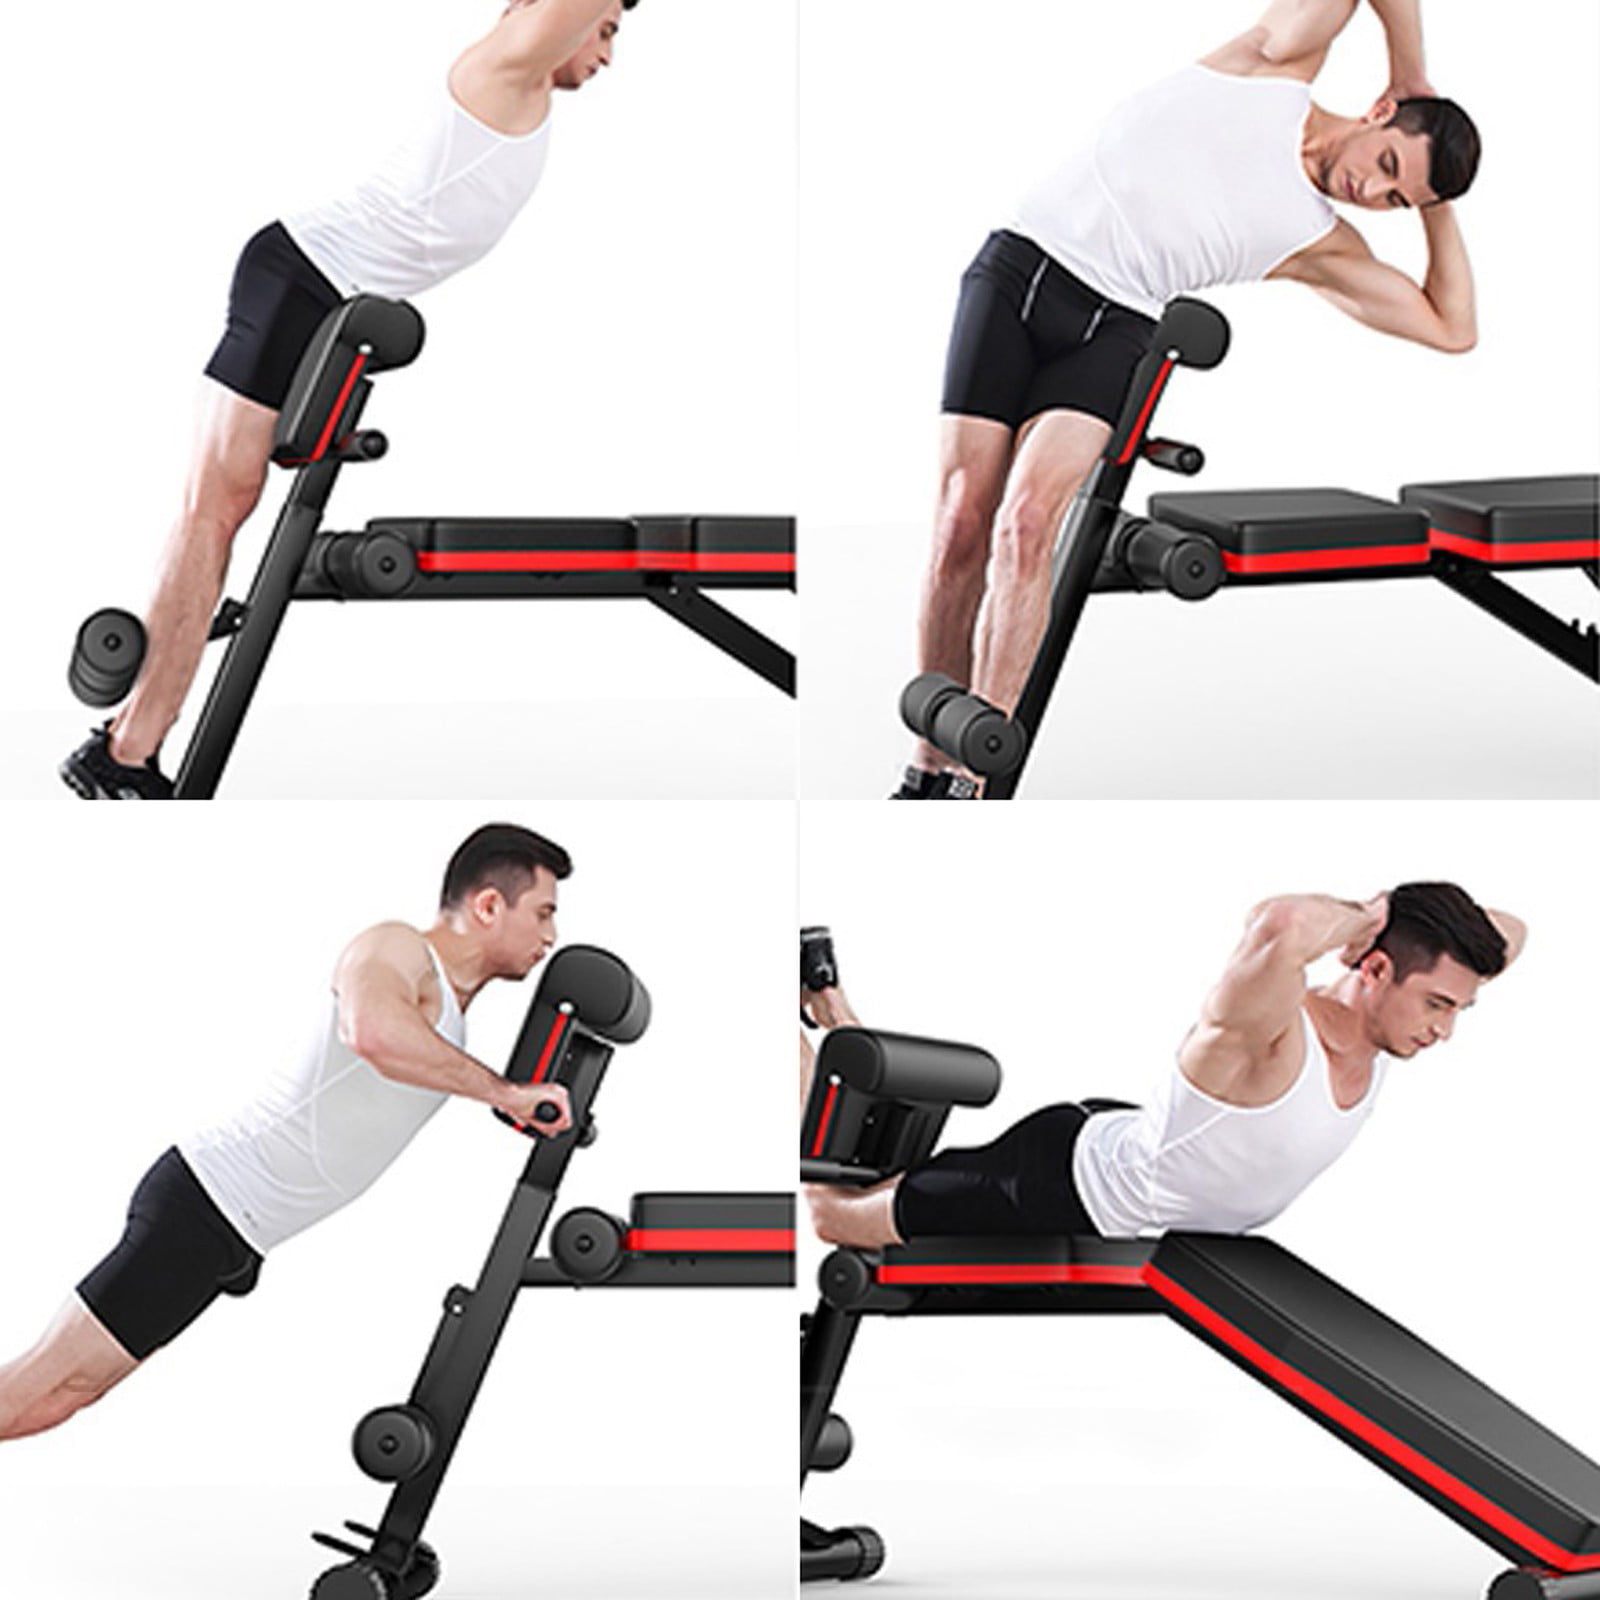 arteesol Adjustable Weight Bench Incline/Decline Flat Weight Lifting Bench Home Training Sit up Gym Bench for Full Body Strength Training Exercise